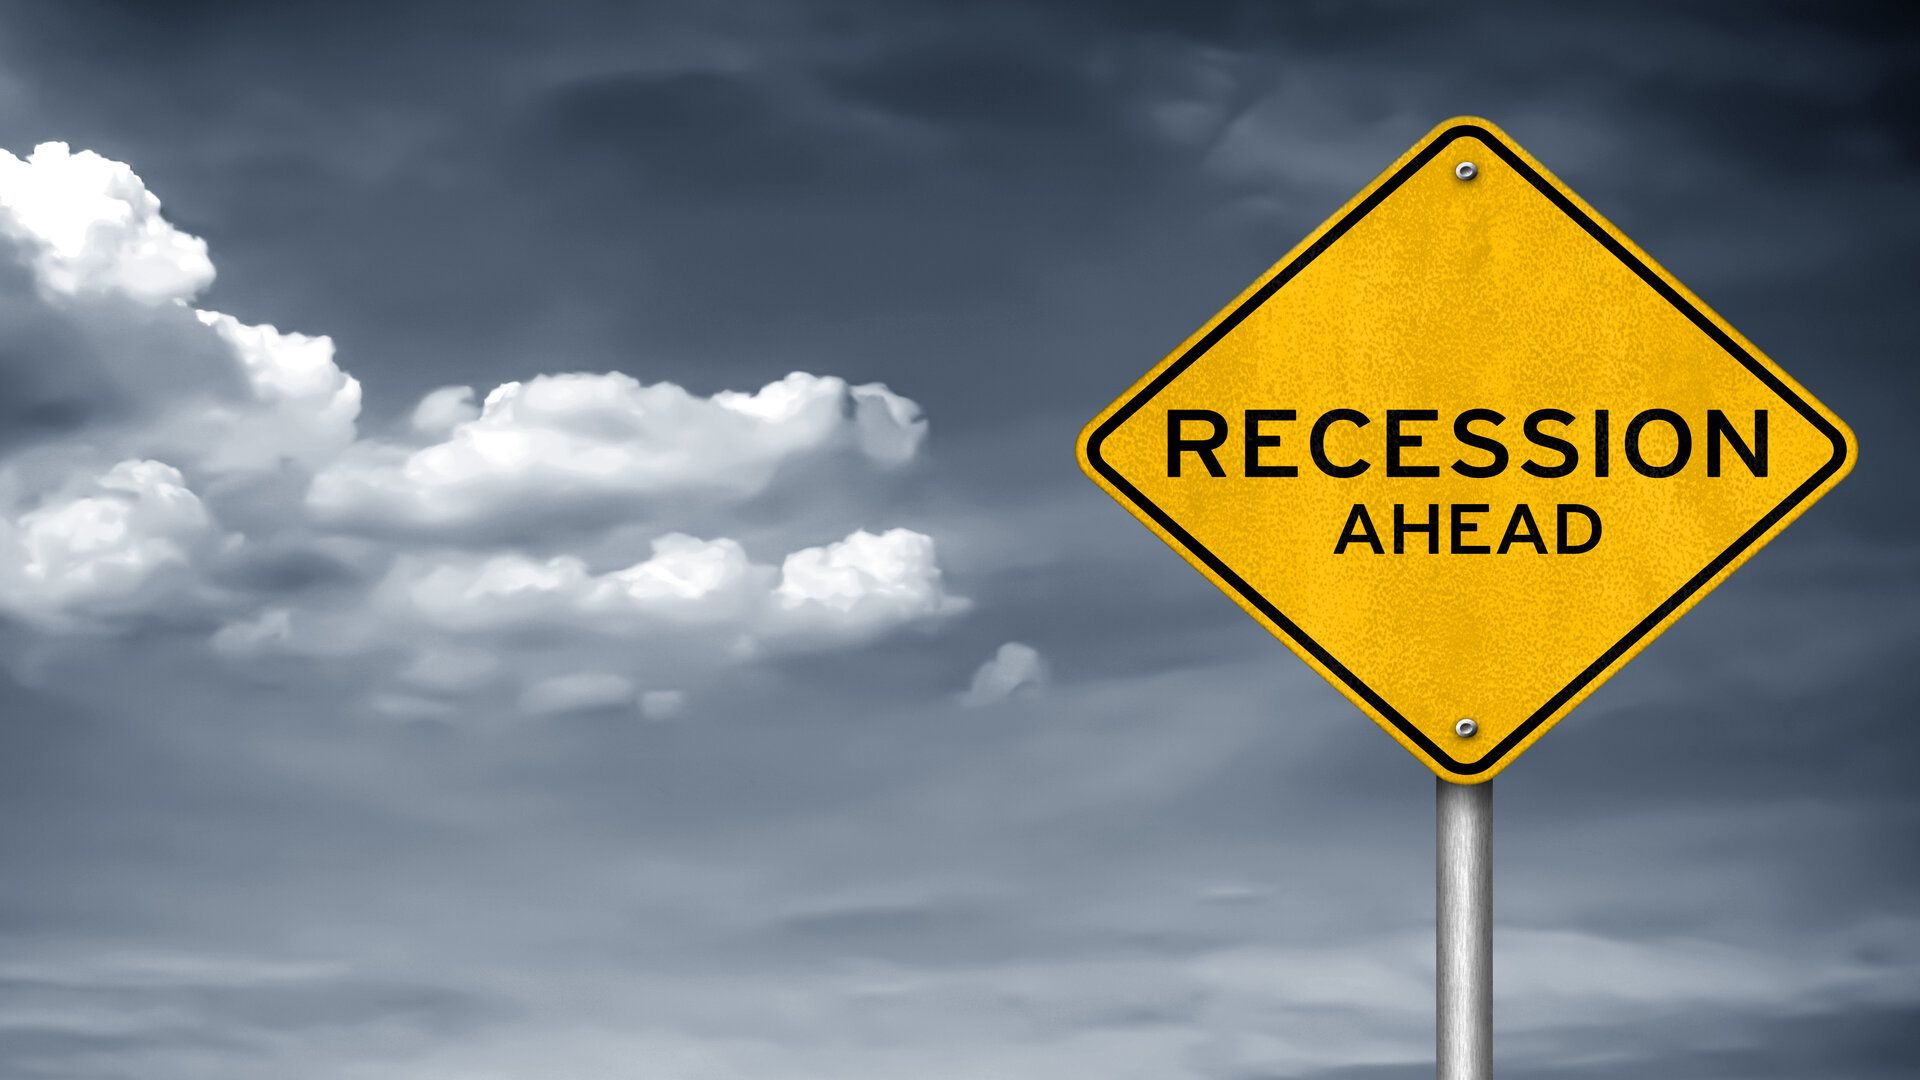 Learn about Recession